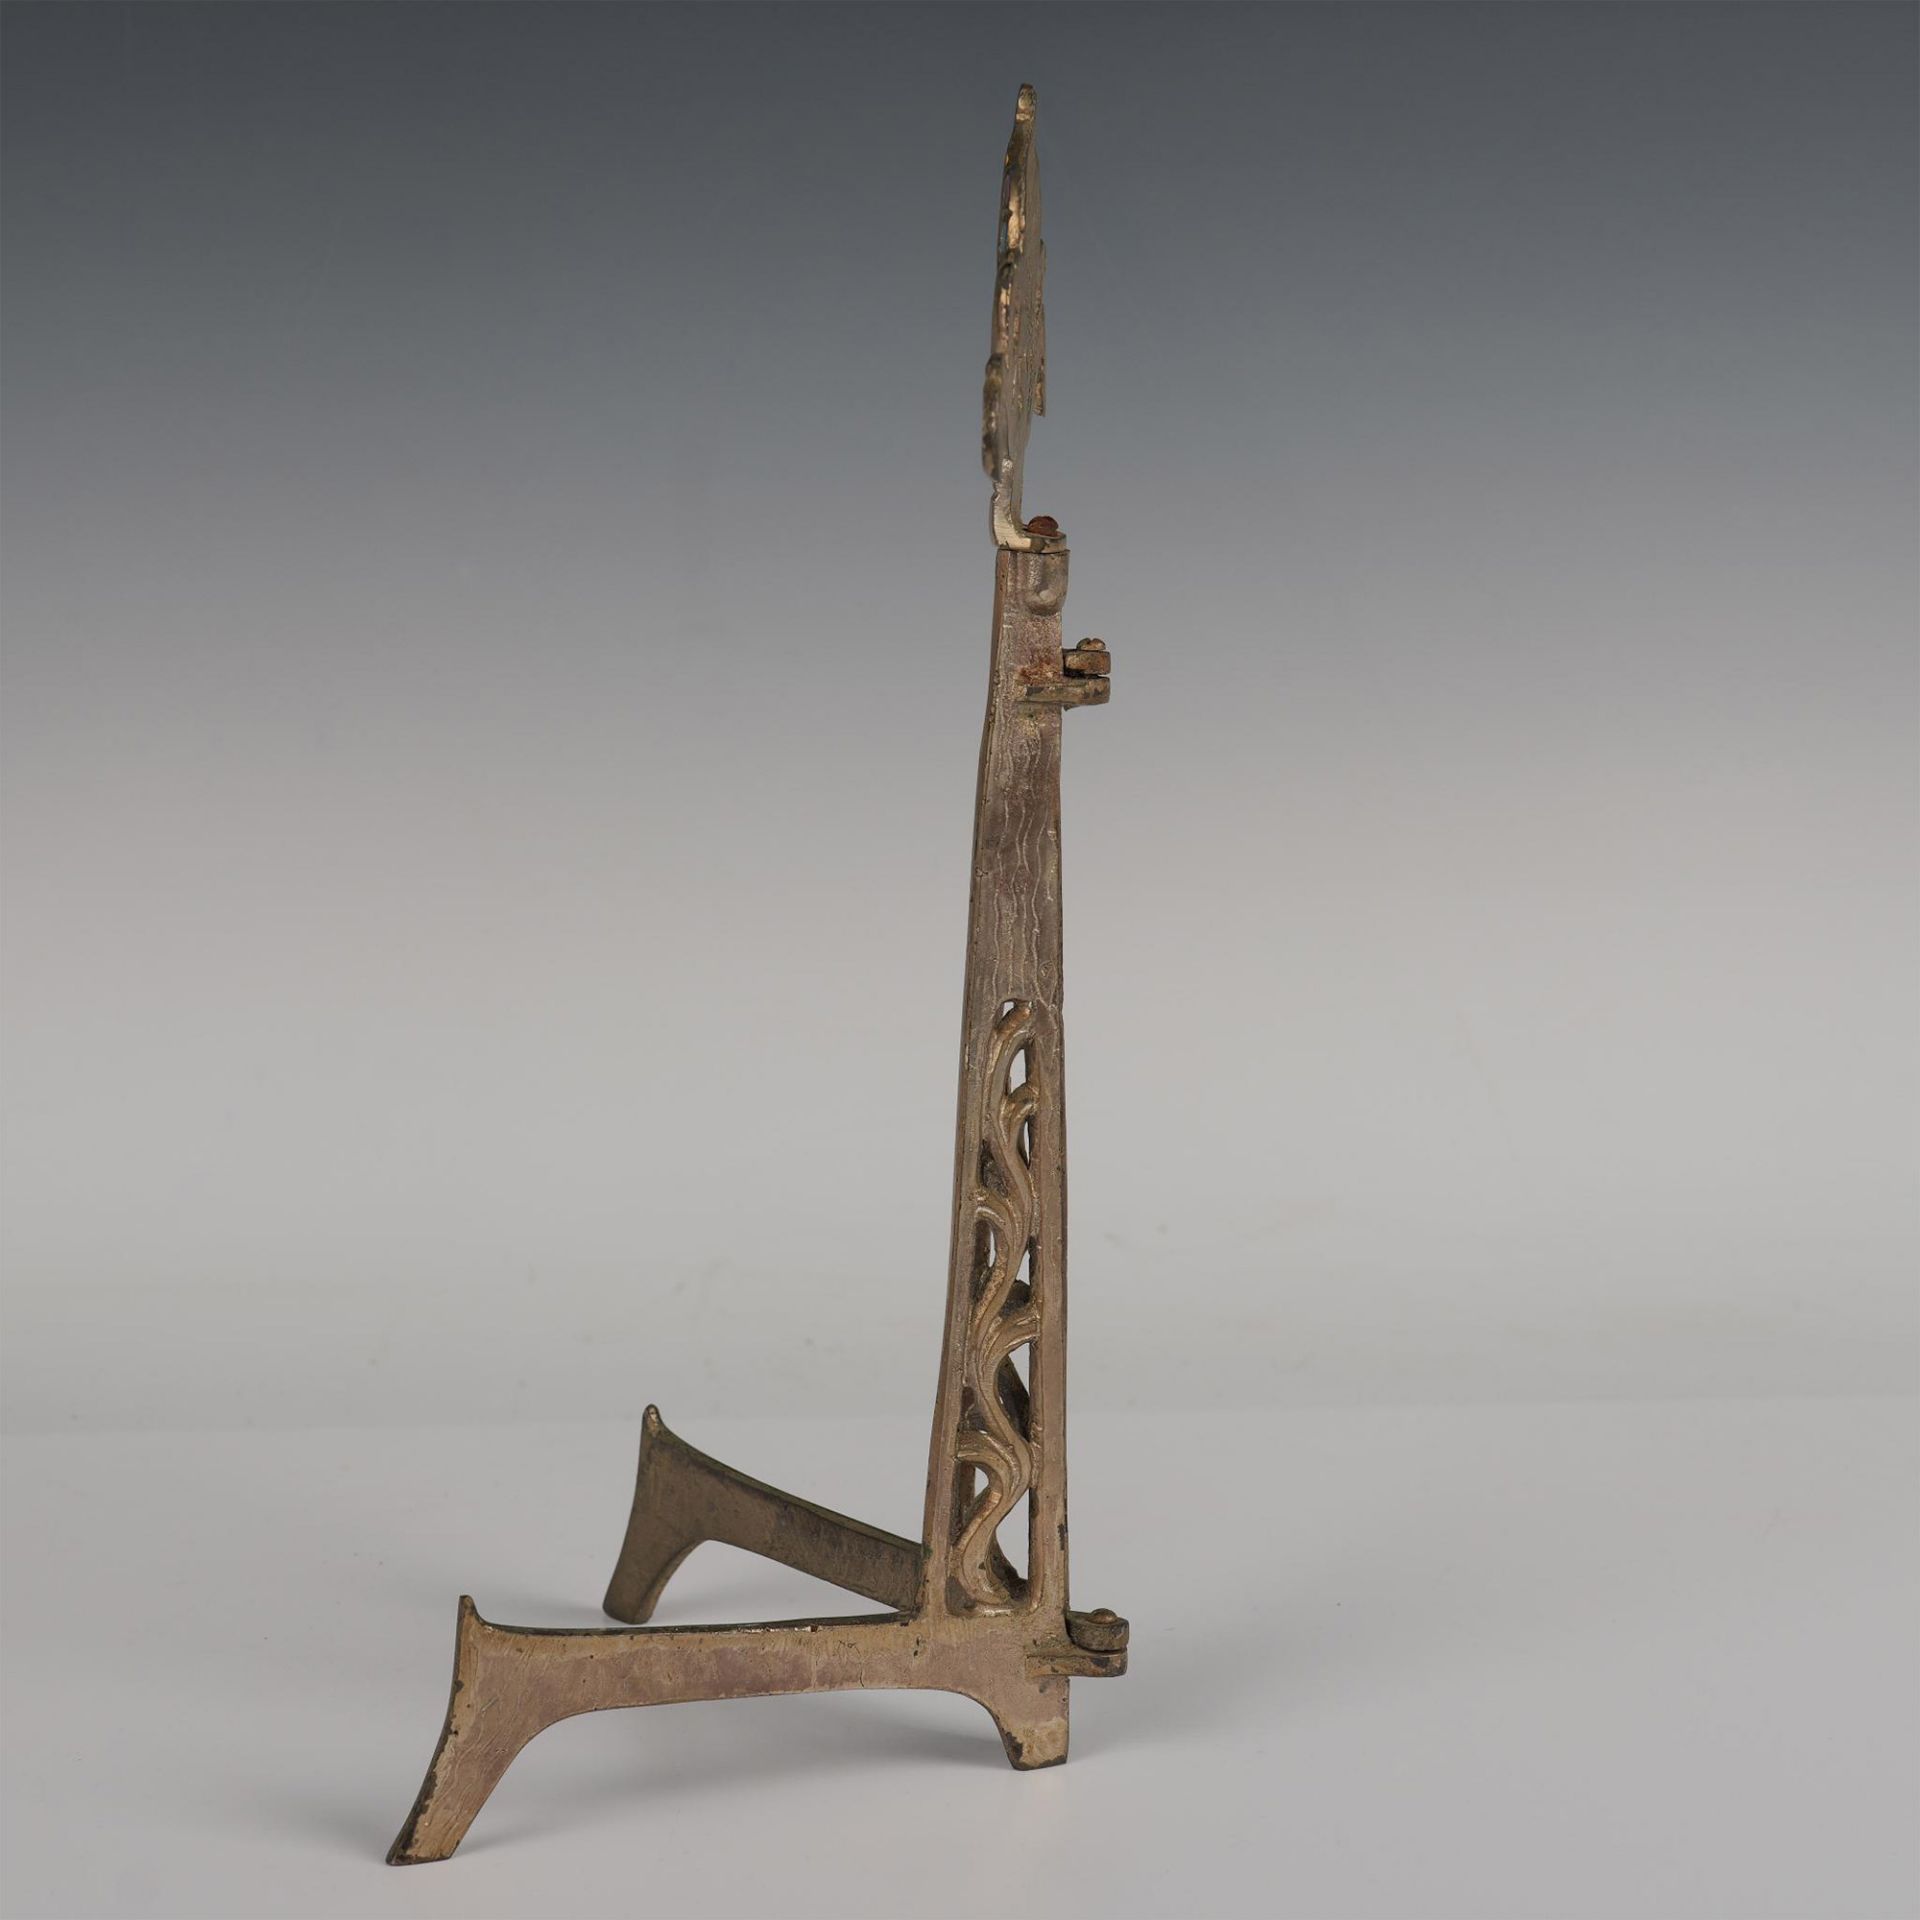 Original Made in Israel Polychrome Cast Iron Easel/Stand - Image 3 of 5